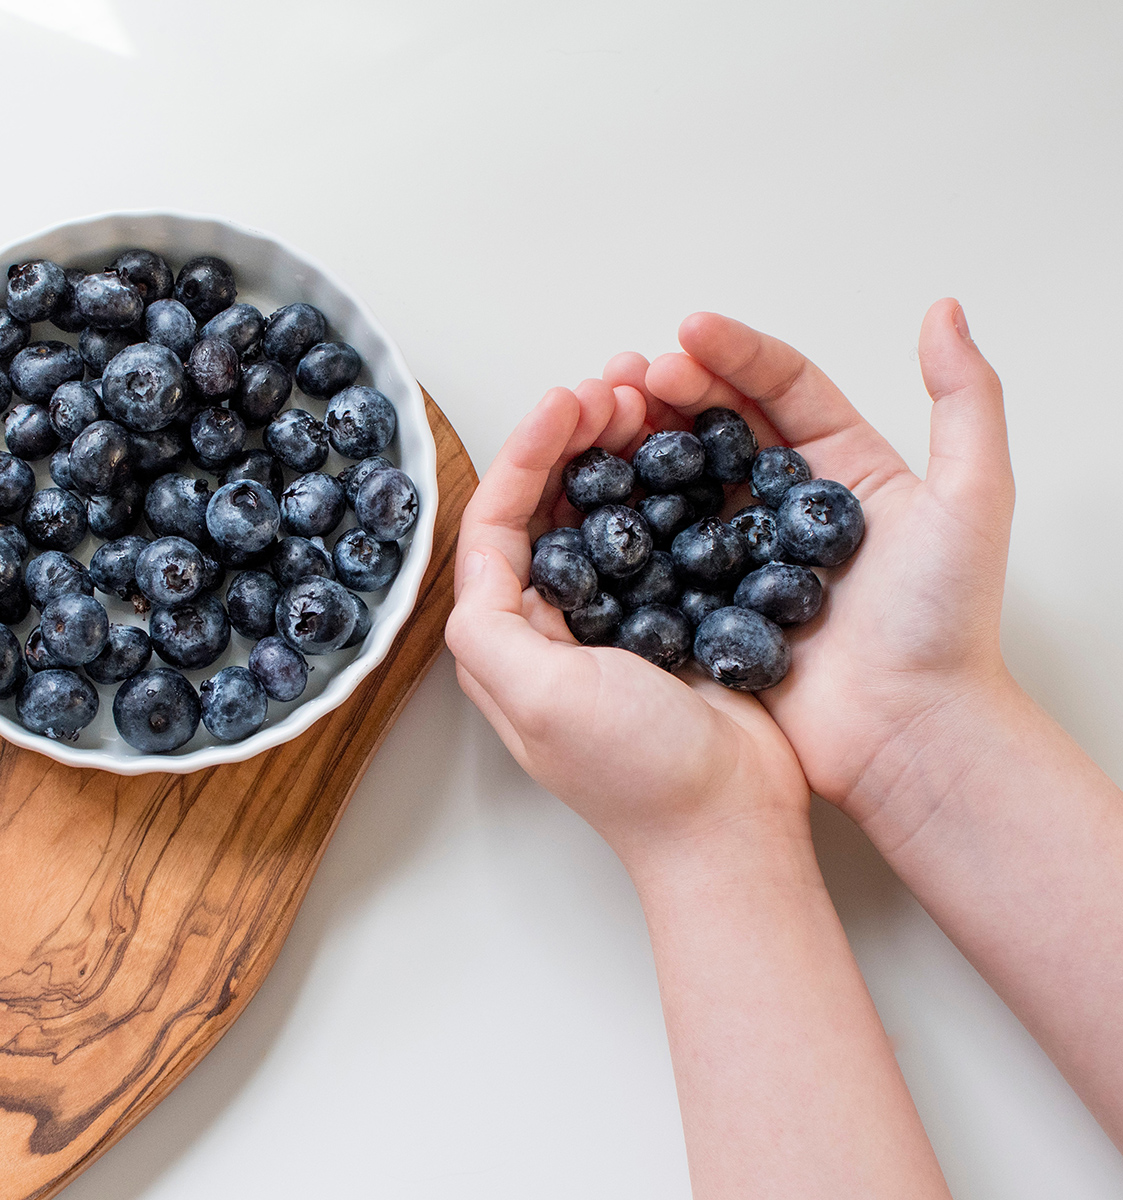 A child taking a handful of berries from a bowl filled with blueberries